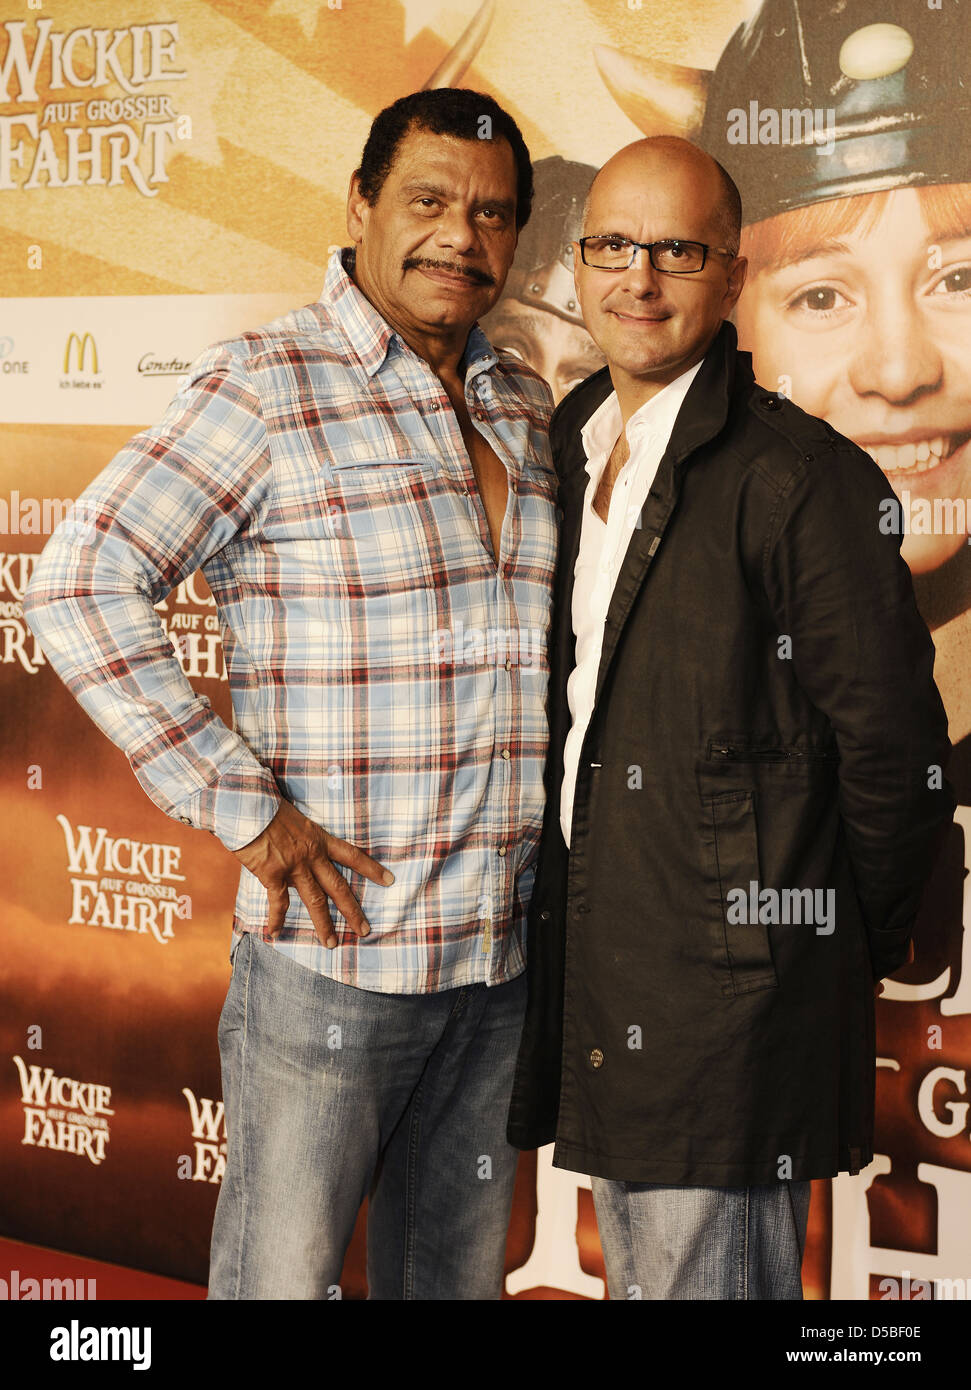 Guenther Kaufmann and Christoph Maria Herbst at the premiere of the movie 'Wickie auf grosser Fahrt' at Mathaeser cinema. Stock Photo